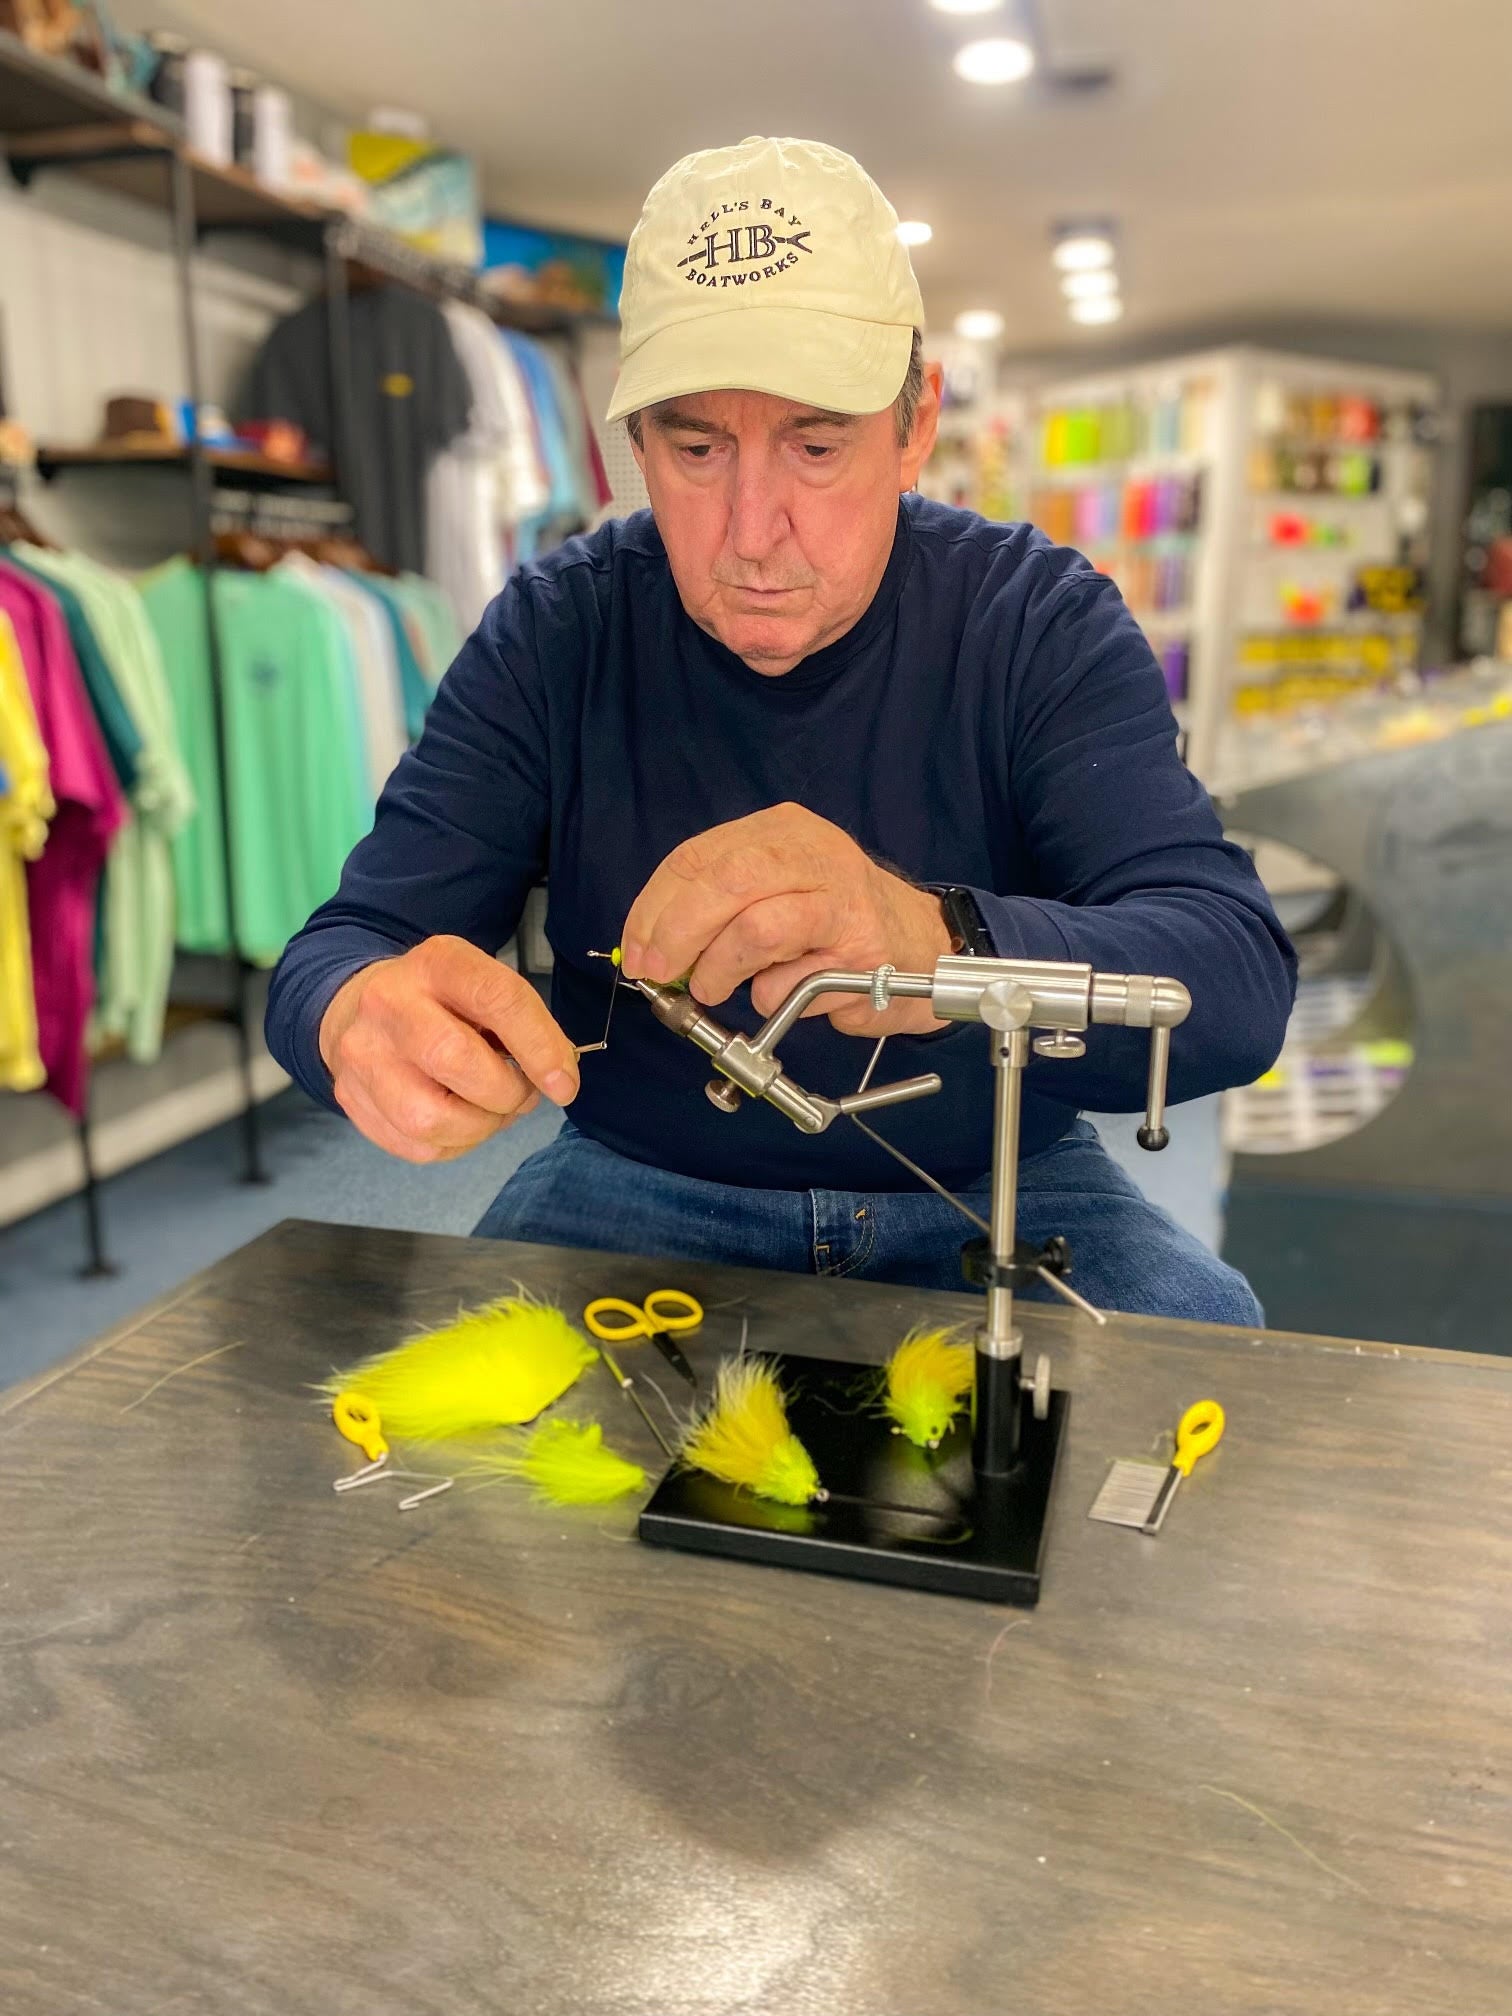 February the 9th Old City Fly Shop Fly Tying Night!